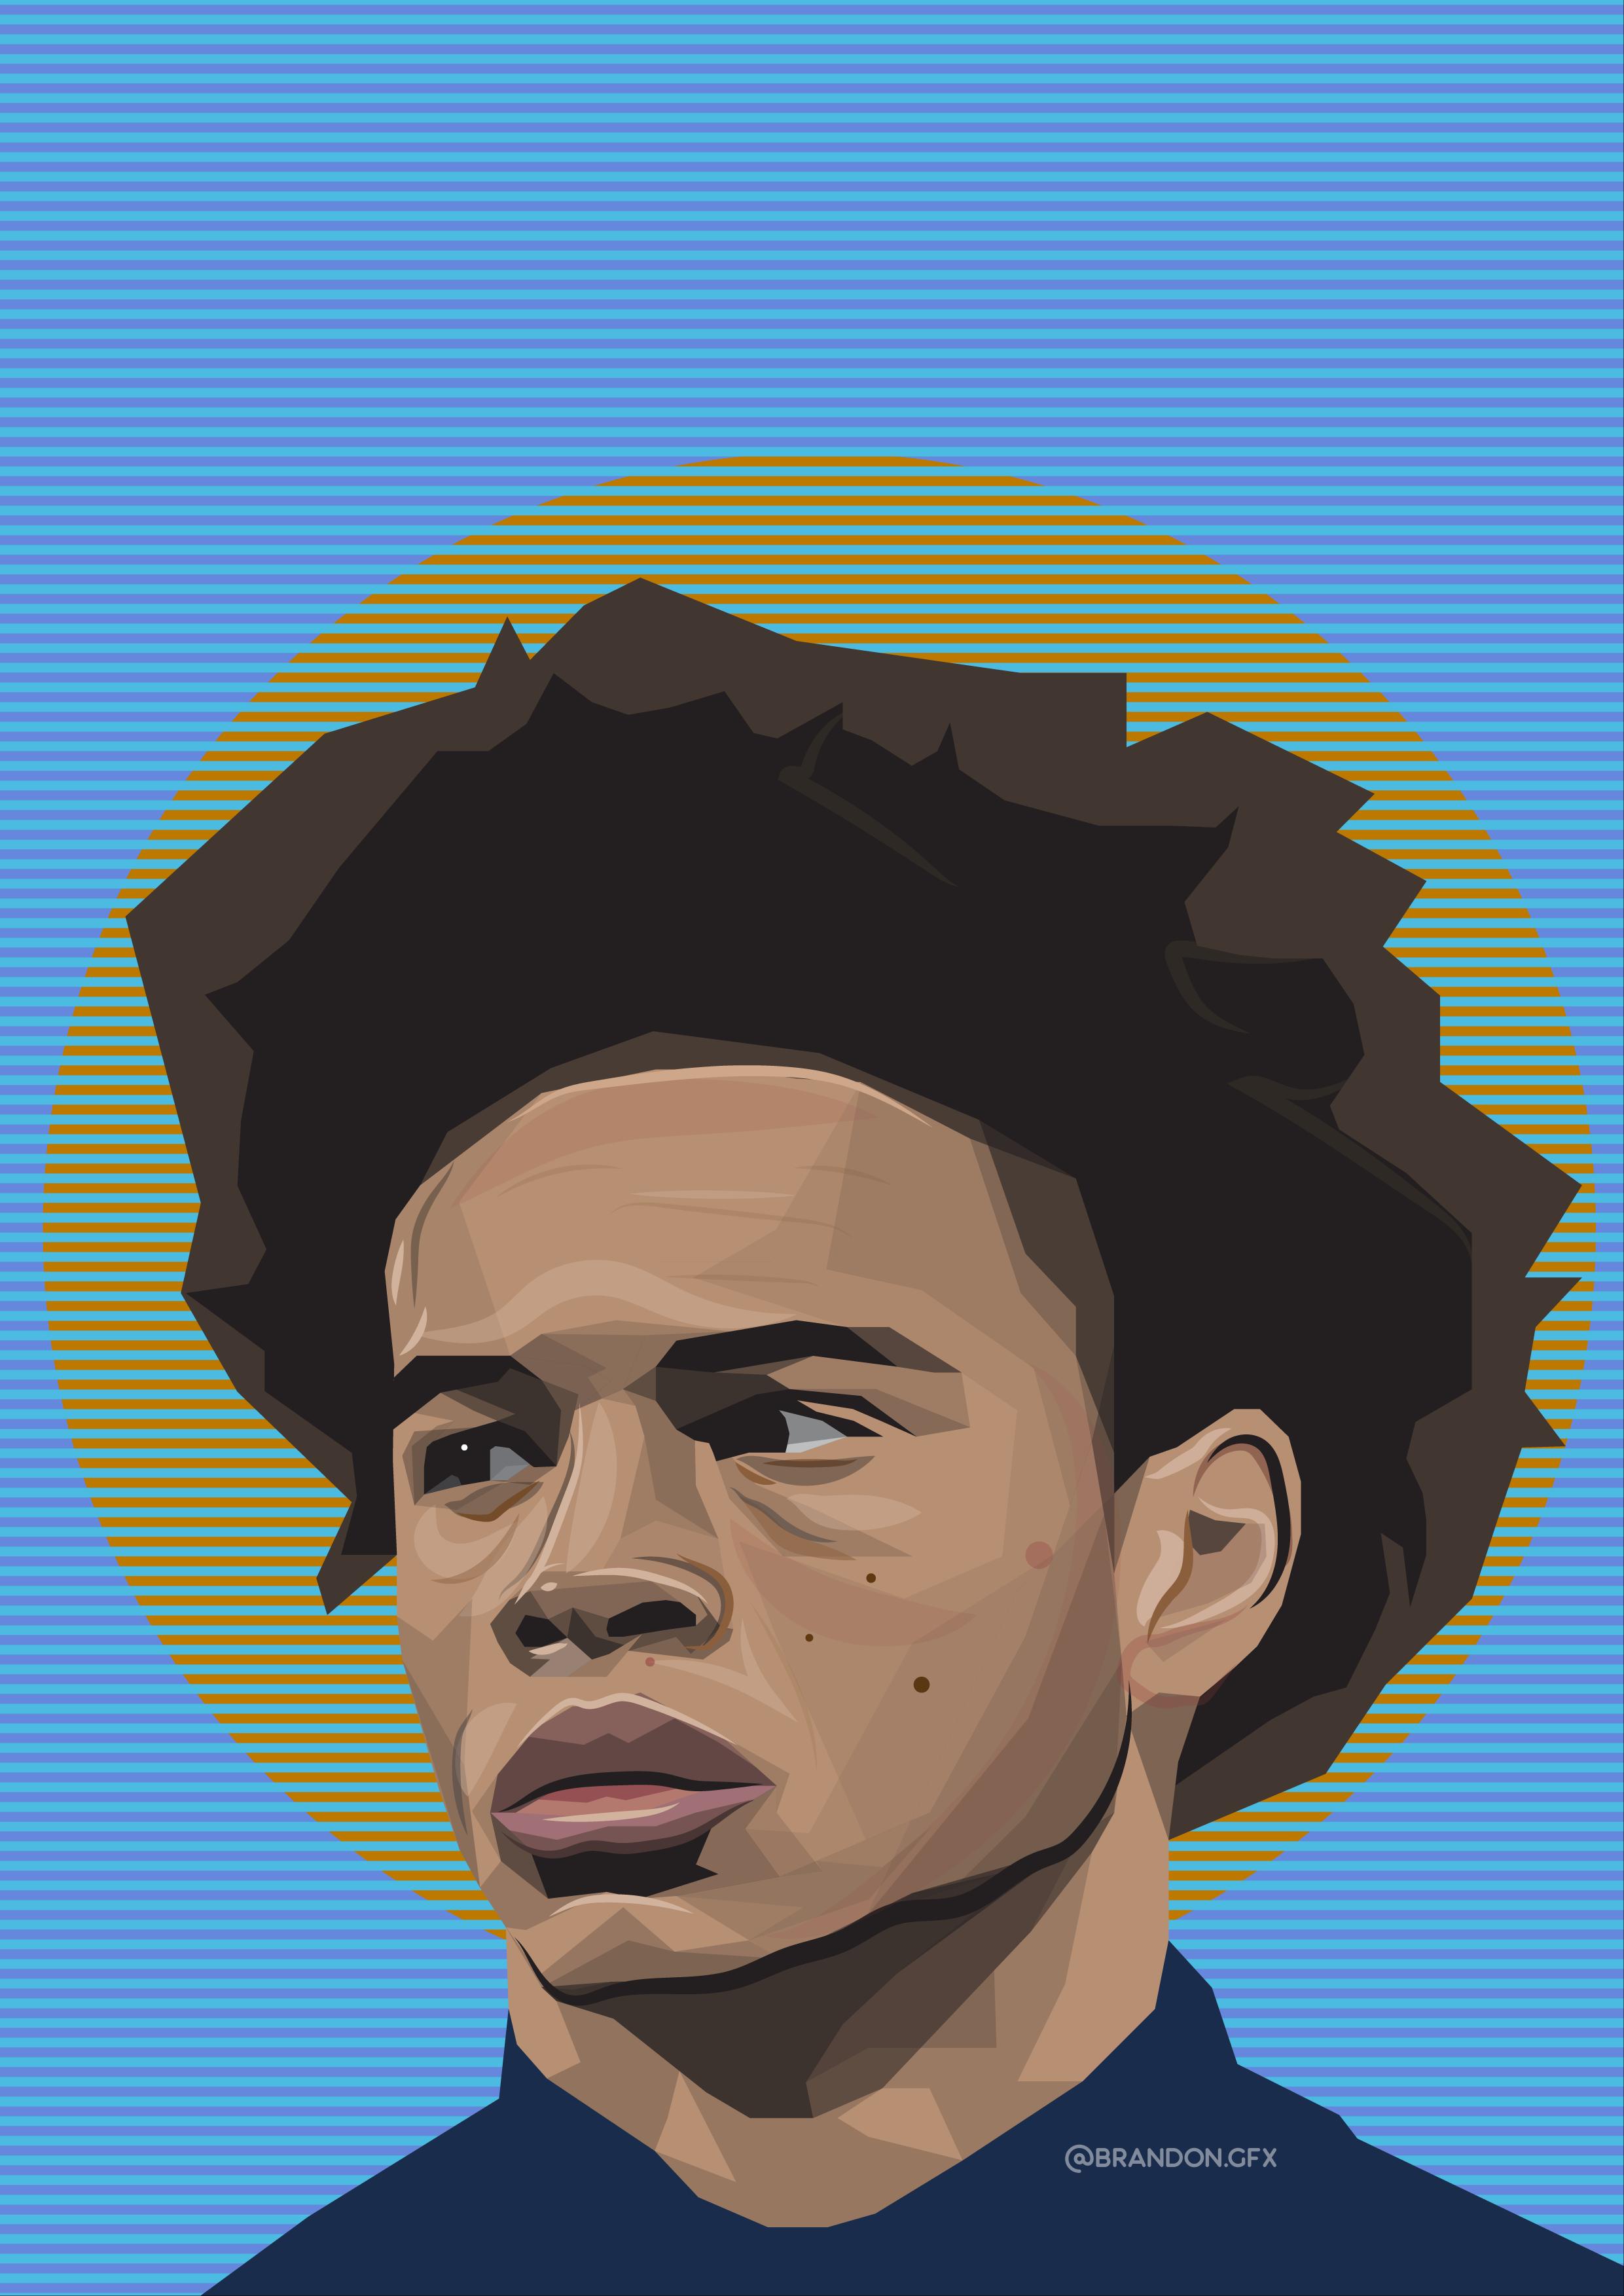 Leroy Sane Wallpaper 4k Ultra HD For Android Apk